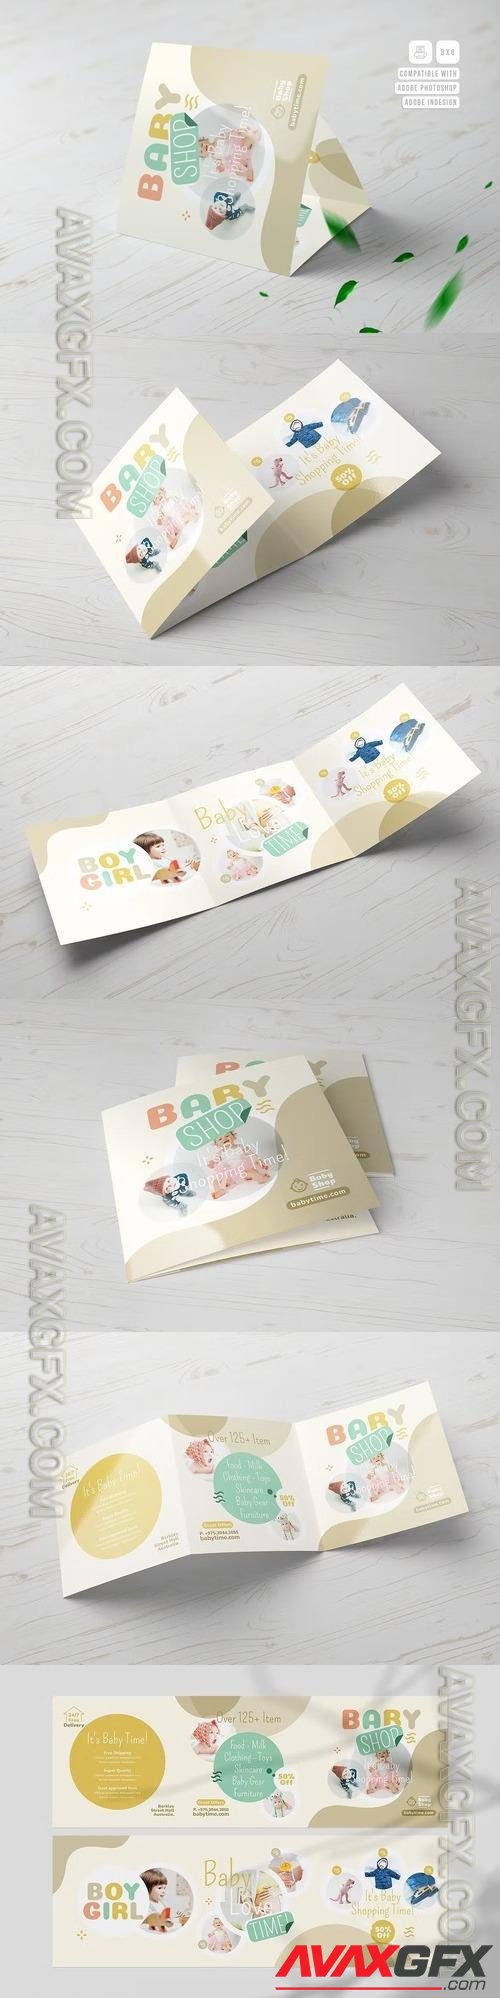 Baby Shop Square Trifold Brochure KSELEX7